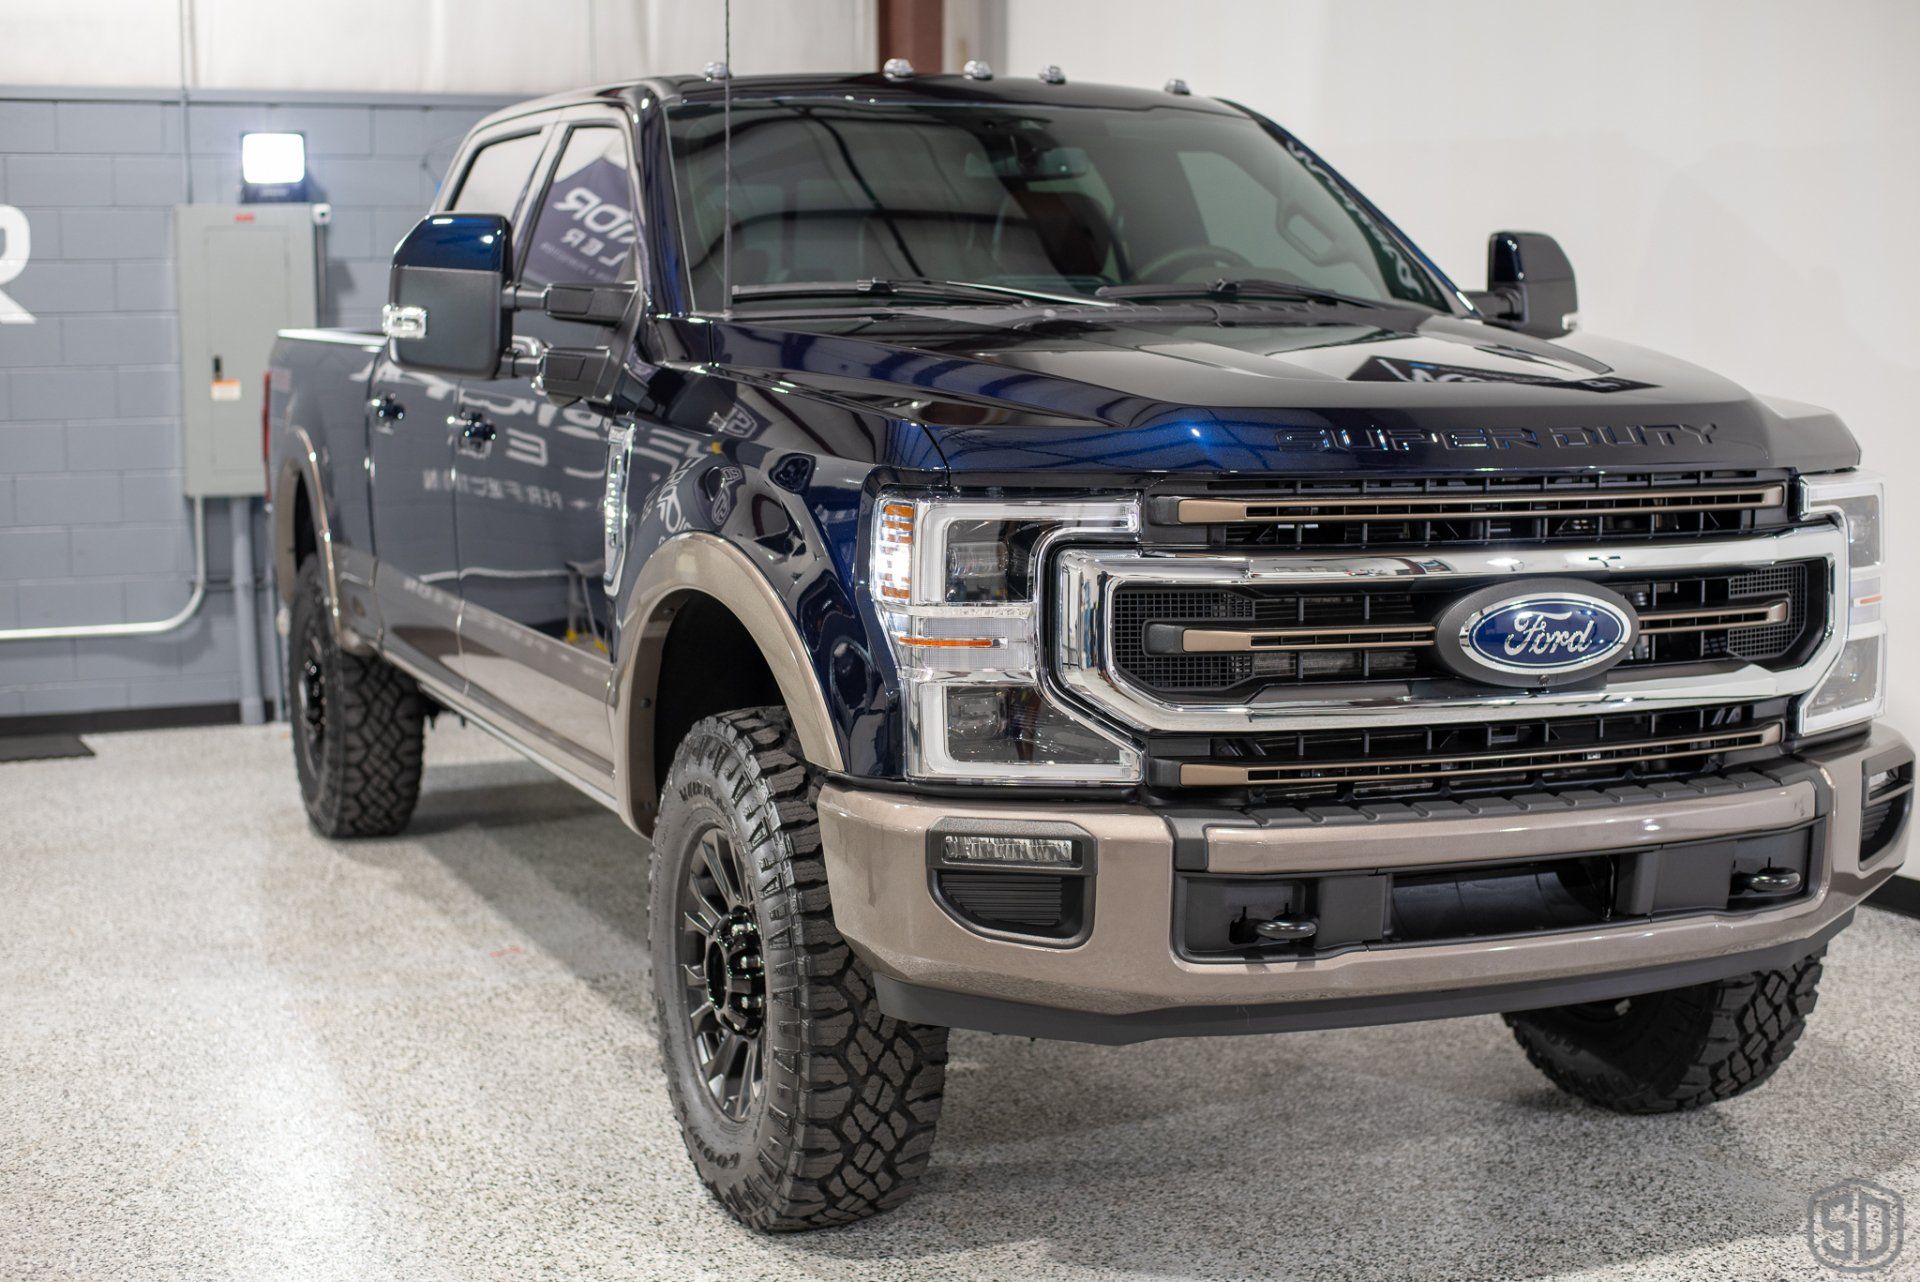 2022 Anti-Matter Blue Ford Truck F350 Road King Modesta level 2 correction and glass coating orlando FL